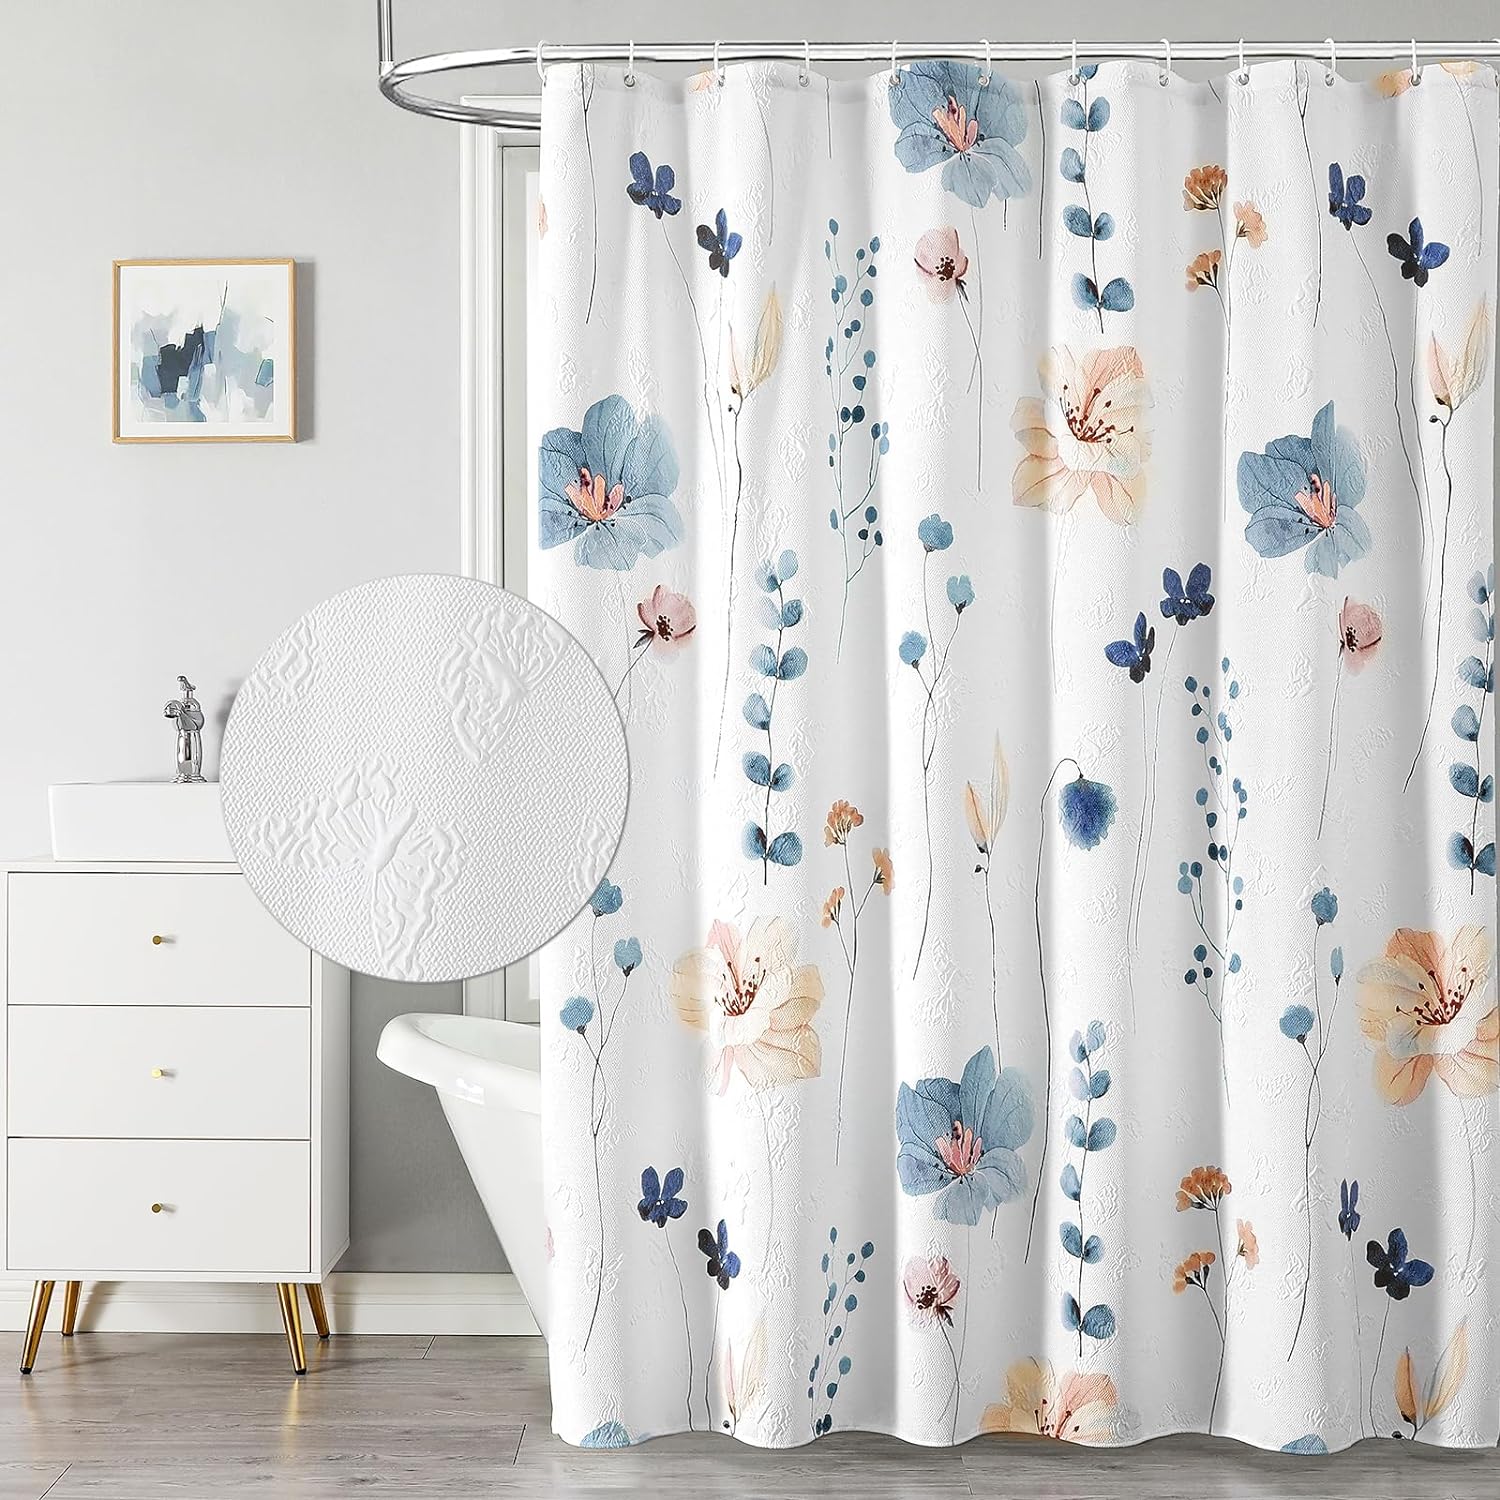 QiyI Watercolor Floral Shower Curtain, 3D Embossed Textured Blue Beige Flower Bathroom Curtain, Modern Minimalist White Cloth Bath Curtain, Waterproof Fabric Shower Curtain Set with Hooks, 72x72 Inch